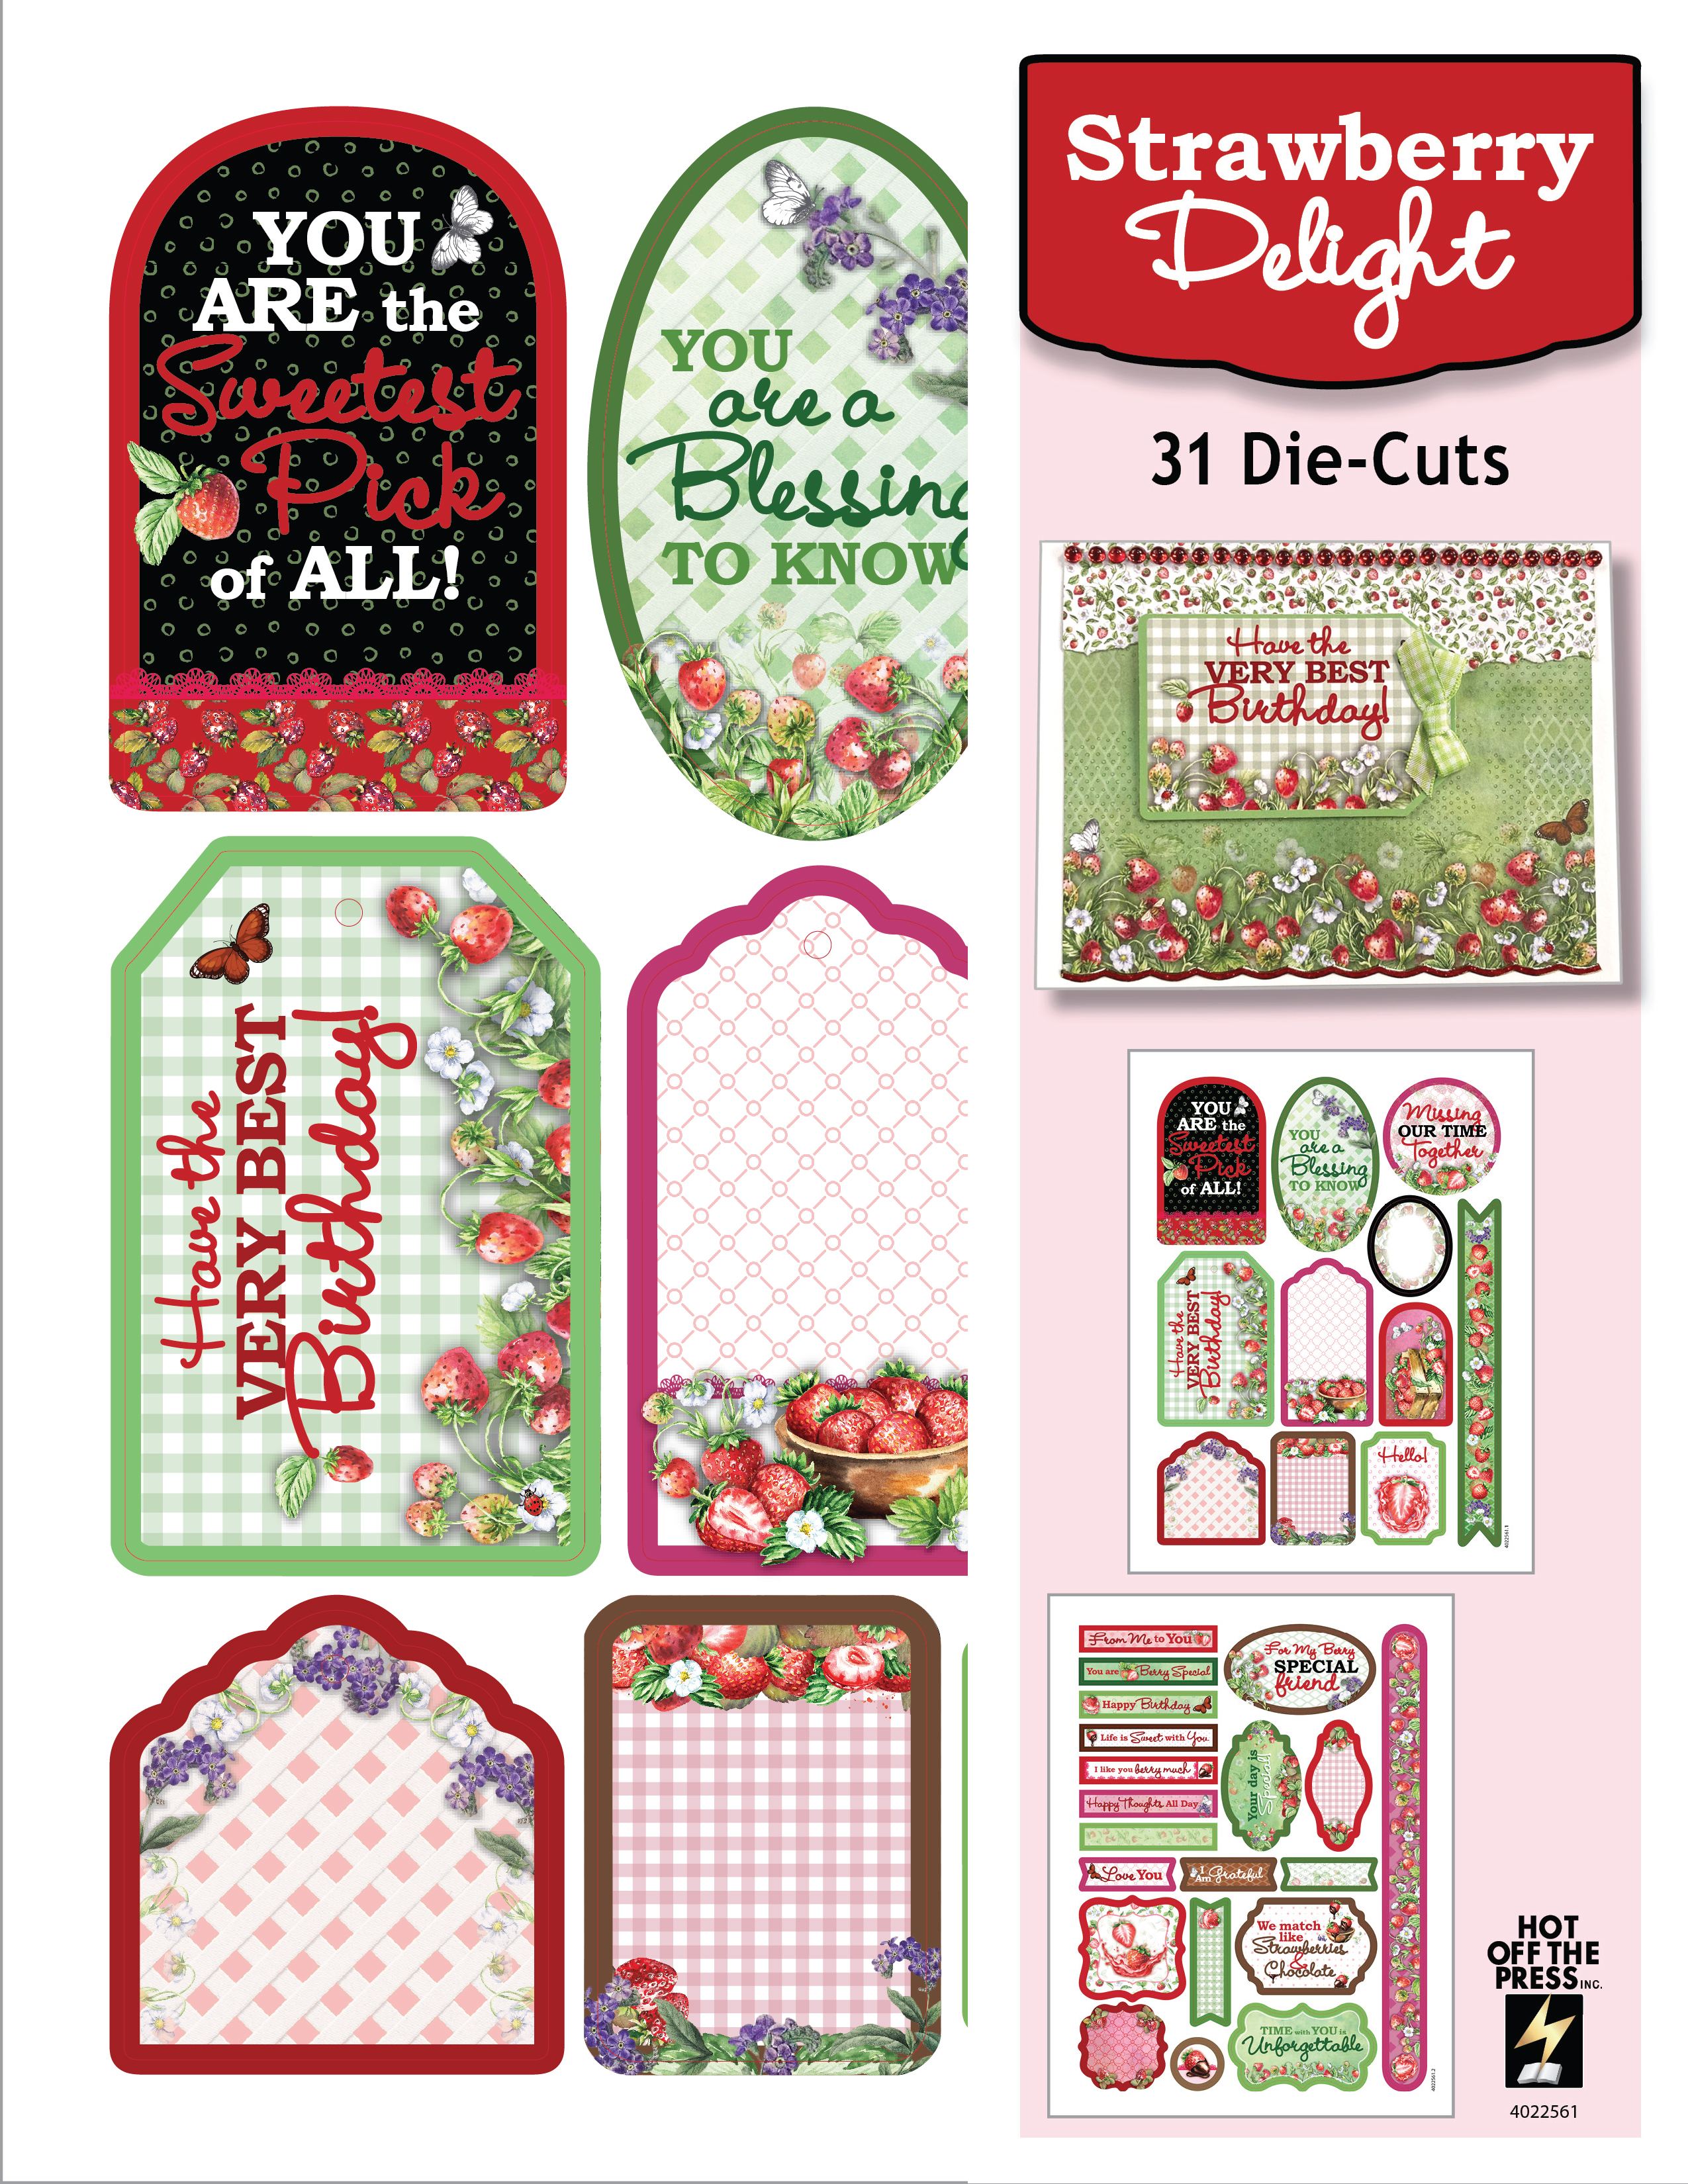 Strawberry Delight Die-Cuts, 31 pieces